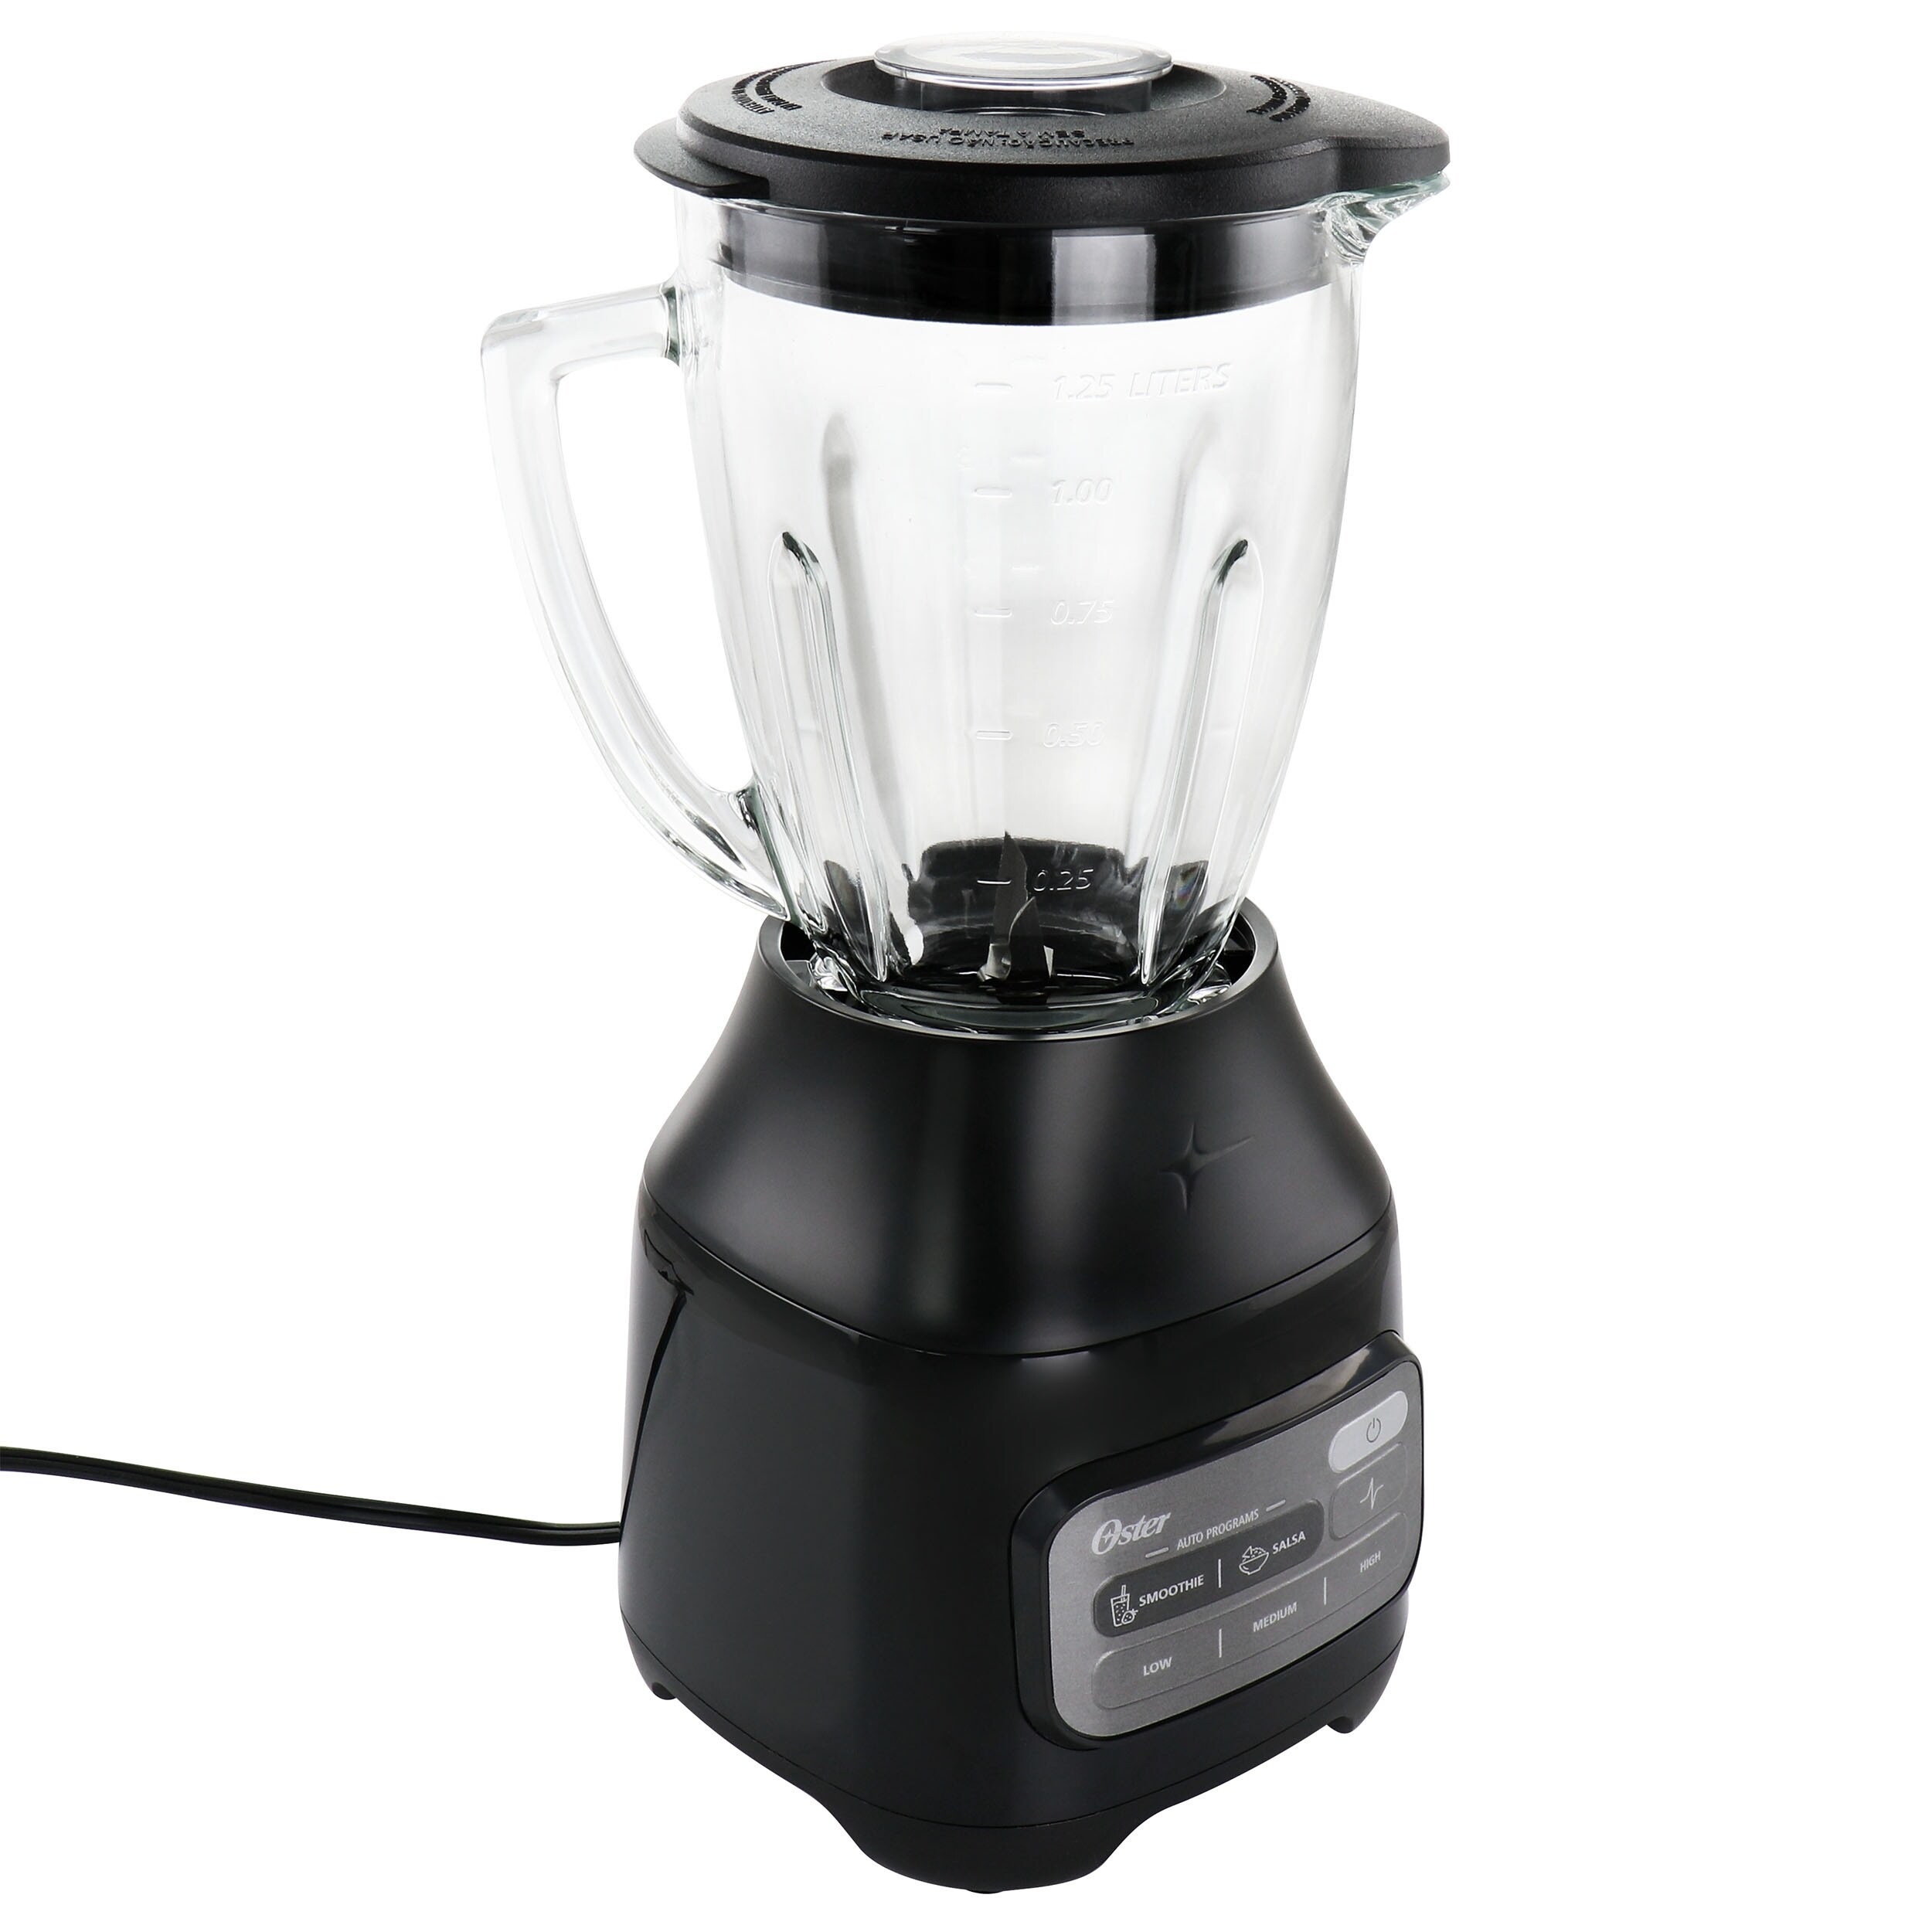 https://ak1.ostkcdn.com/images/products/is/images/direct/5ae66cb389a0bc28daa3b133b6bd1206cbecb779/Oster-800-Watt-6-Cup-One-Touch-Blender-with-Auto-Program.jpg